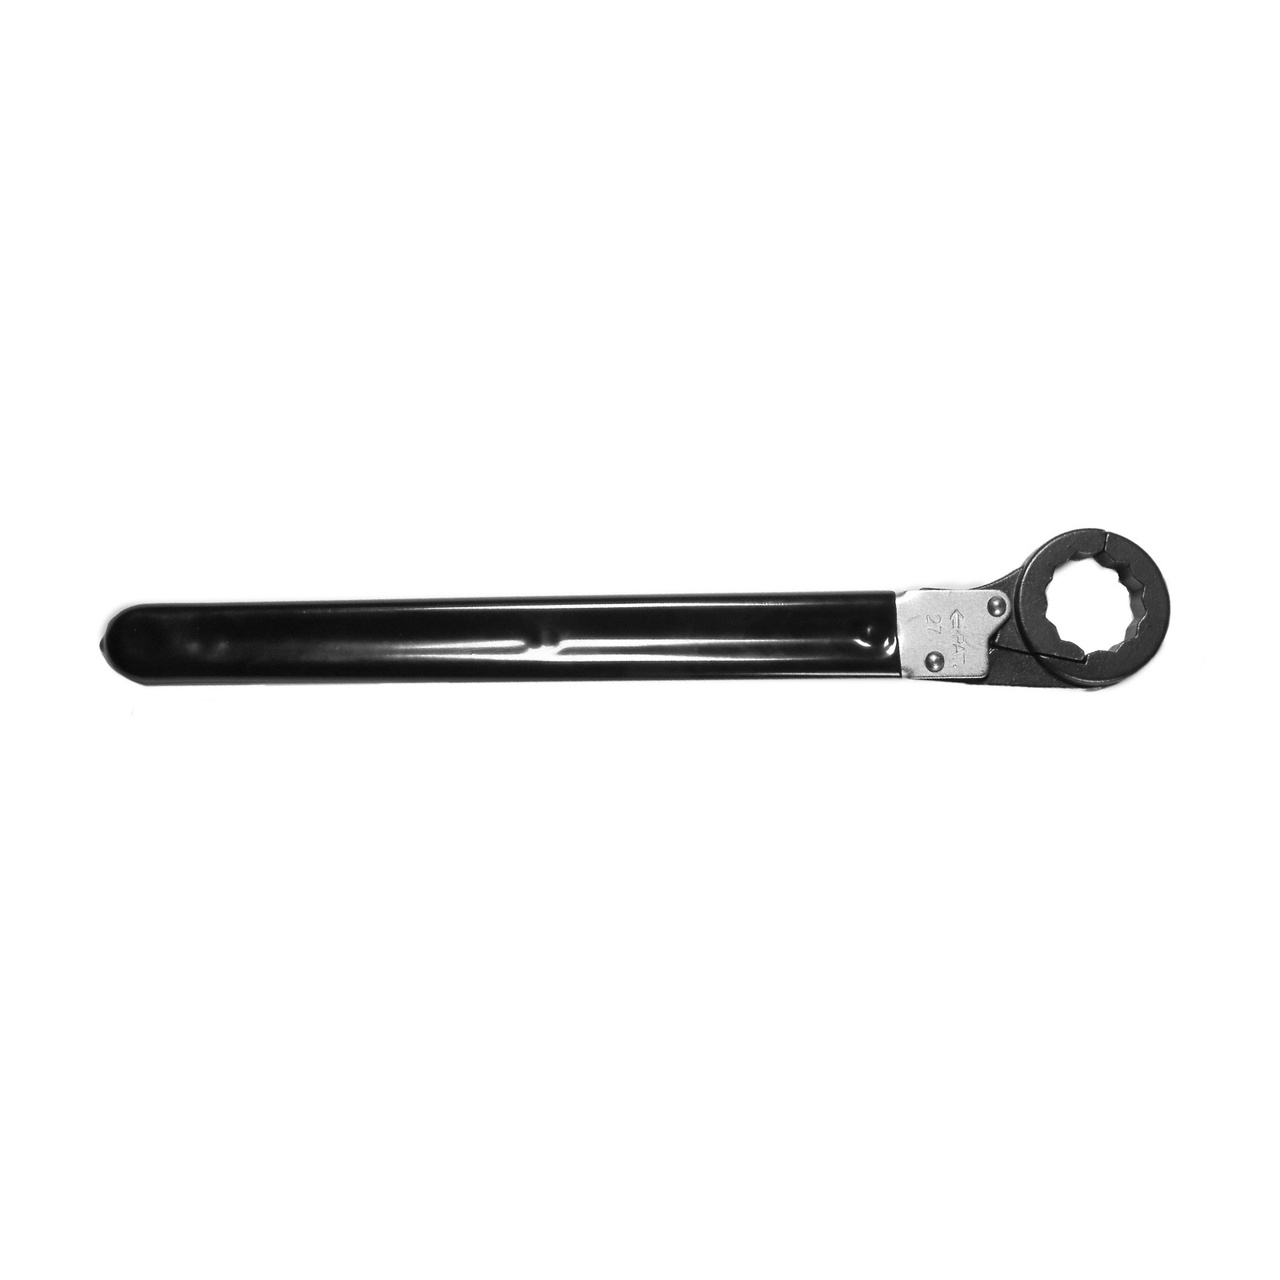 Open Ratchet Wrench 17 mm